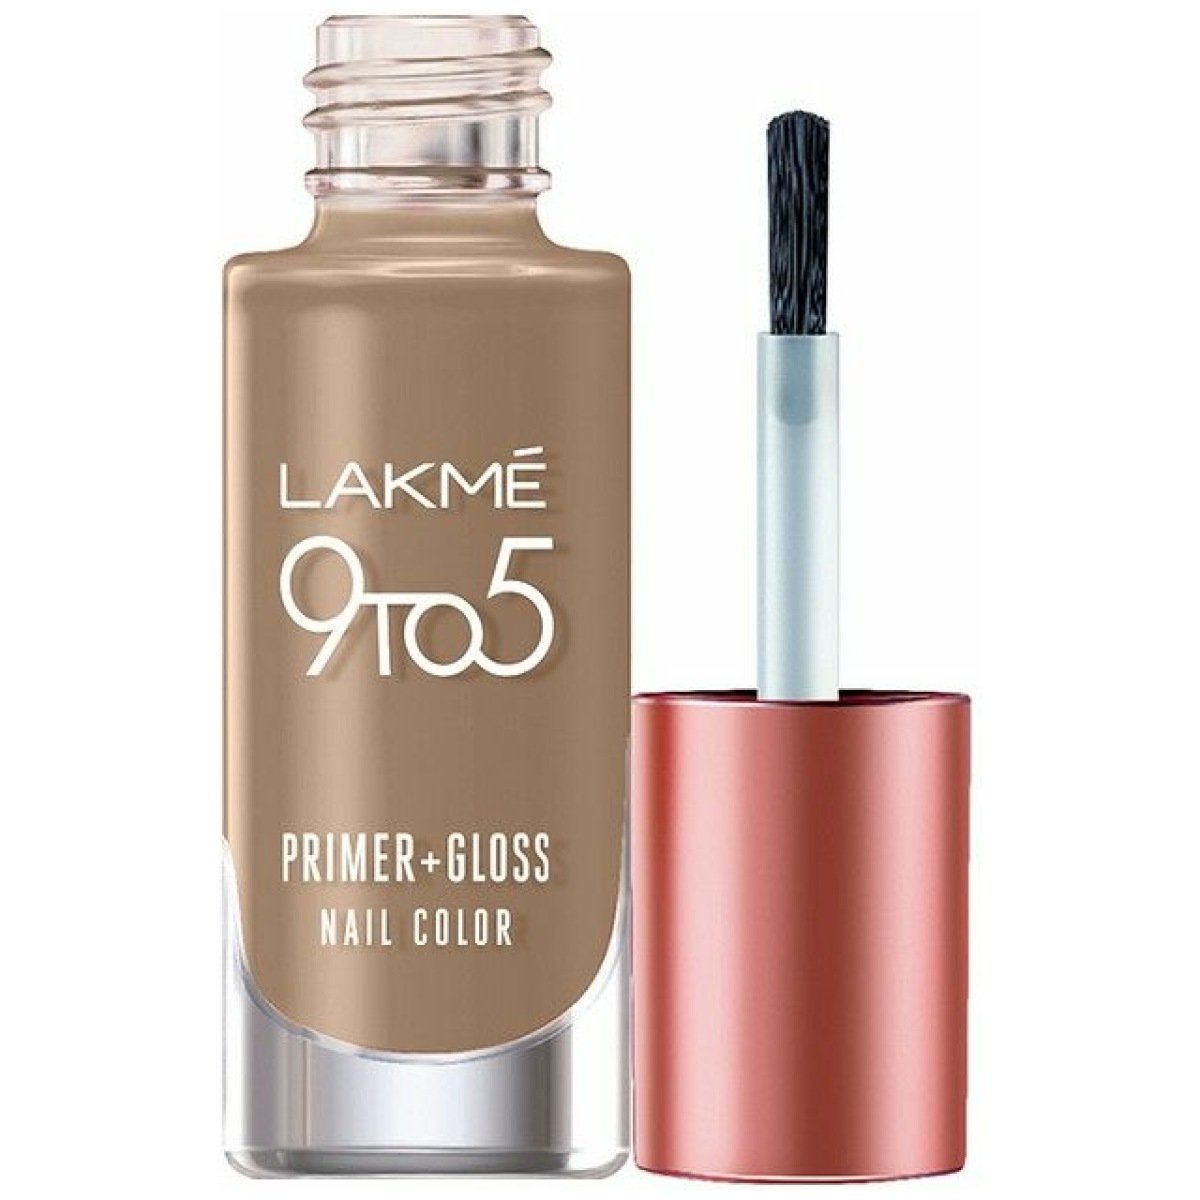 Lakmé 9 to 5 Primer and Matte Nail Color, Charcoal, 9ml : Amazon.in: Beauty